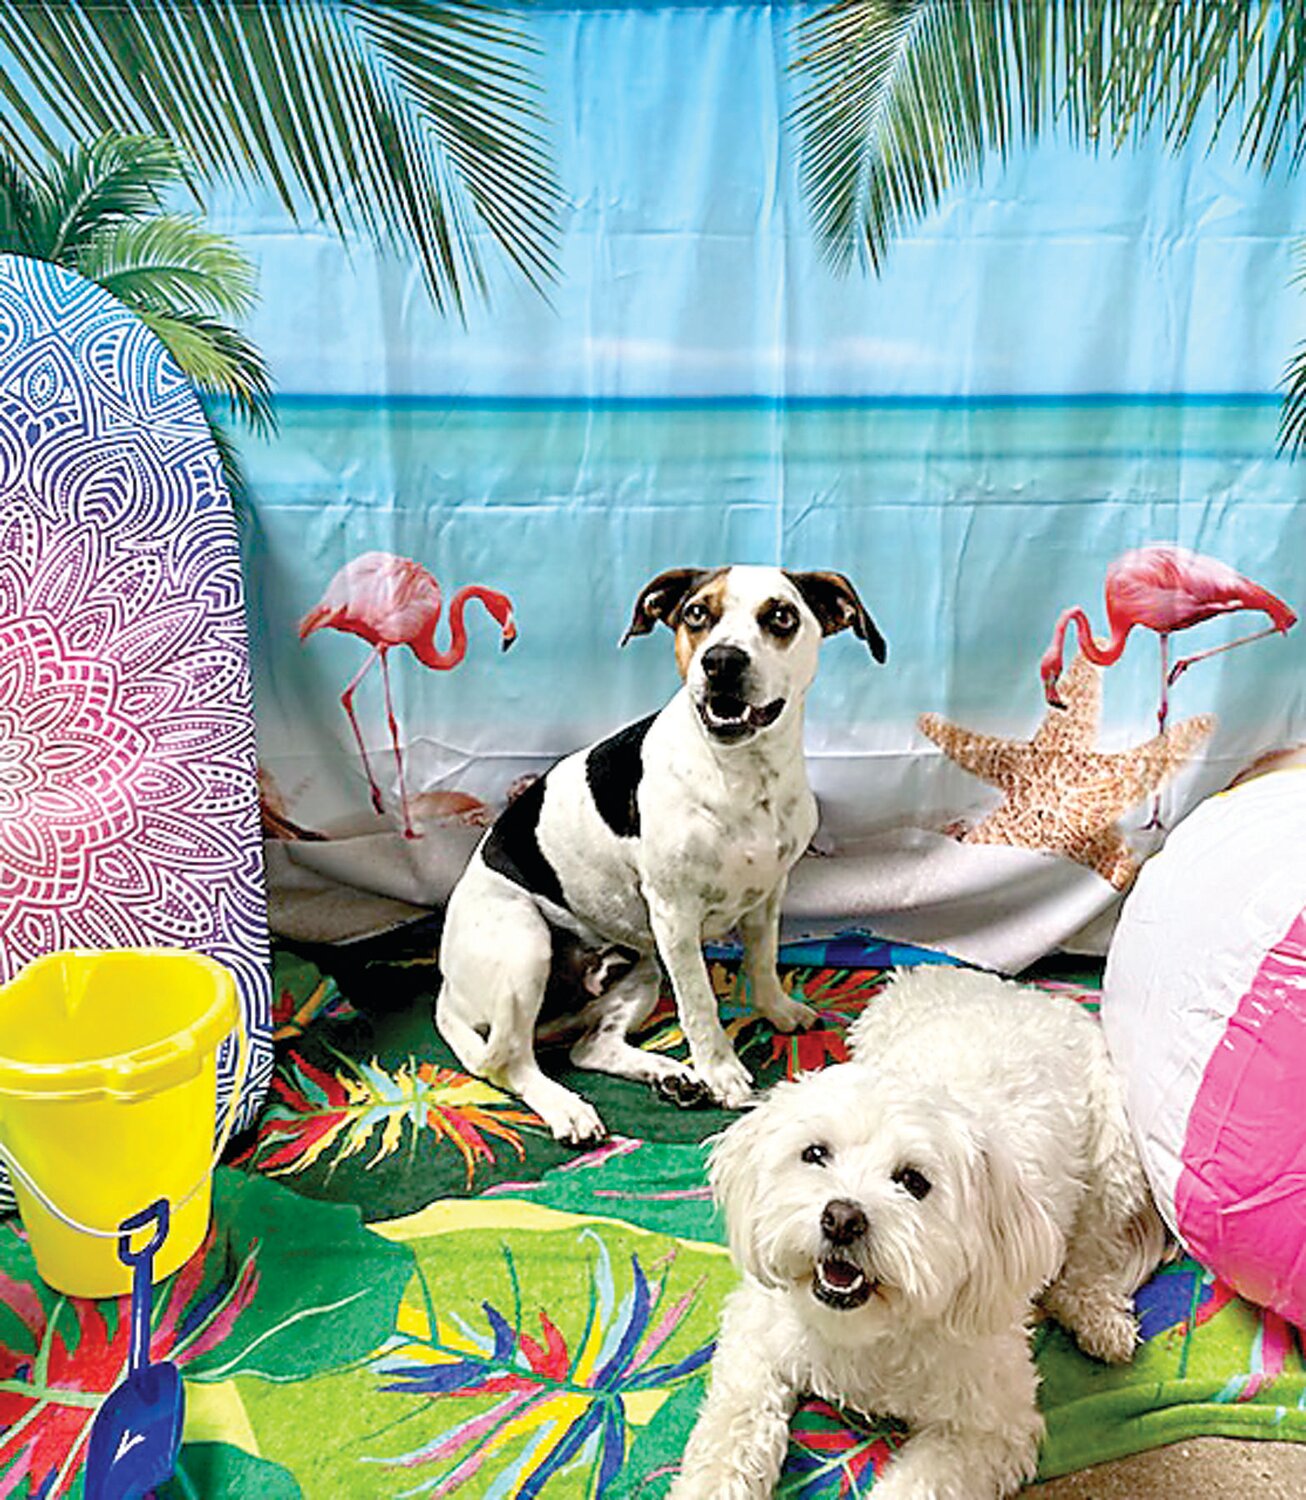 Dottie and Ivy attend Holiday House Pet Resort & Training Center’s Key West inspired Pup-A-Palooza, which raised funds for the U.S. War Dogs Association.